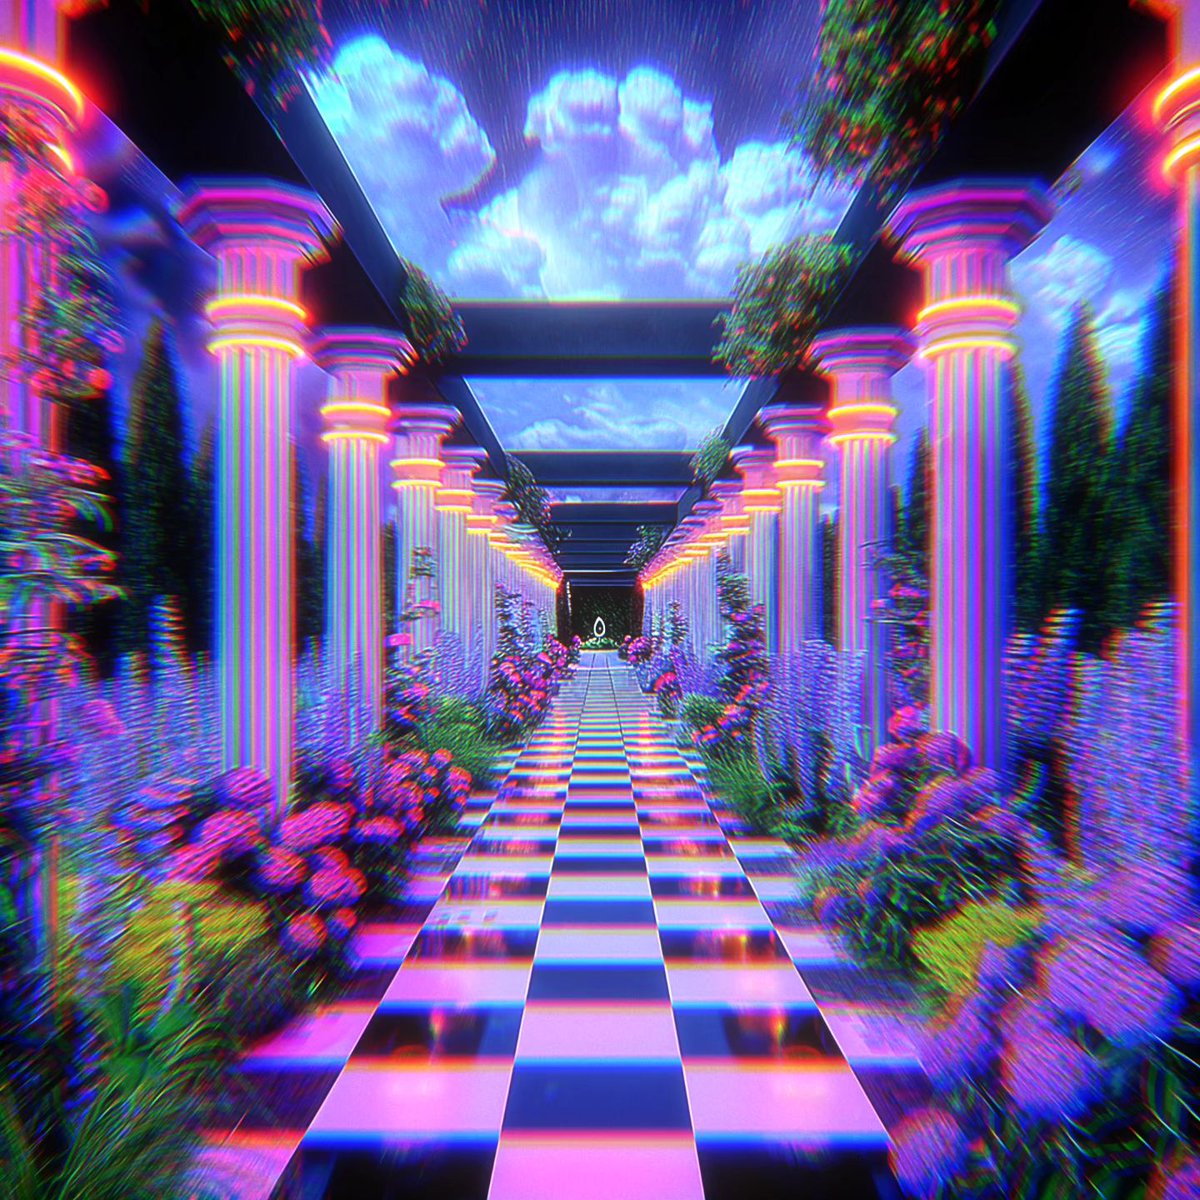 🌸 EARTHLY TRANQUILITY 🌸 Otherworldly garden from H+ Fave @vap0rdr3ams⁠ #hpluscreative #hplusfave #vaporwave #surrealart #dreamcore